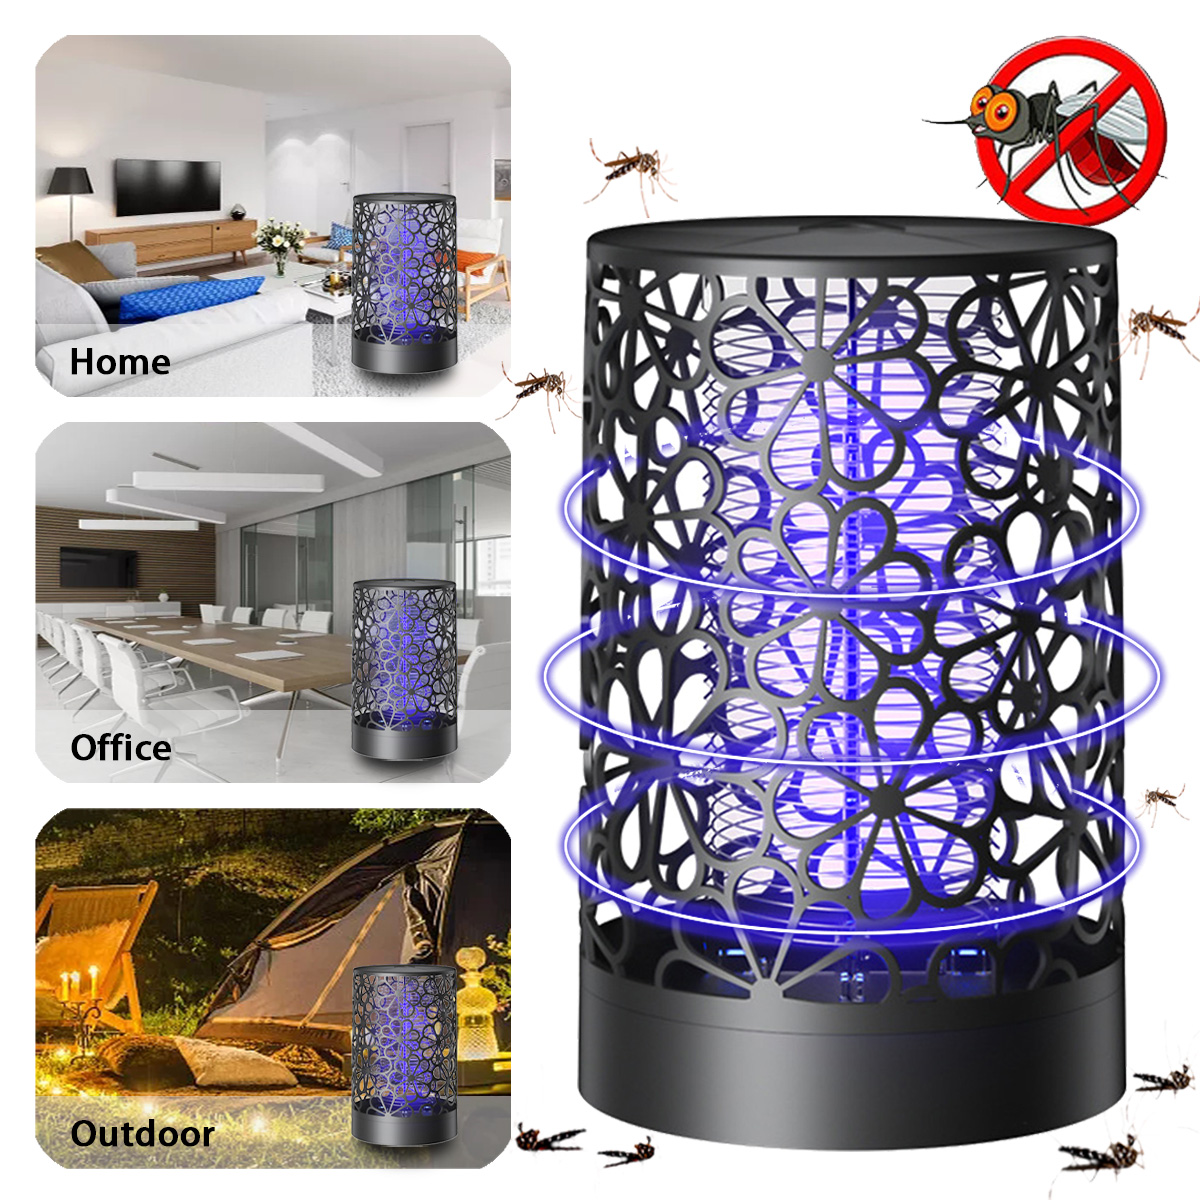 Bakeey-Mosquito-Killing-Lamp-360-Degrees-Trapping-USB-Charging-Cable-Power-UV-Mosquito-Killer-1857253-3